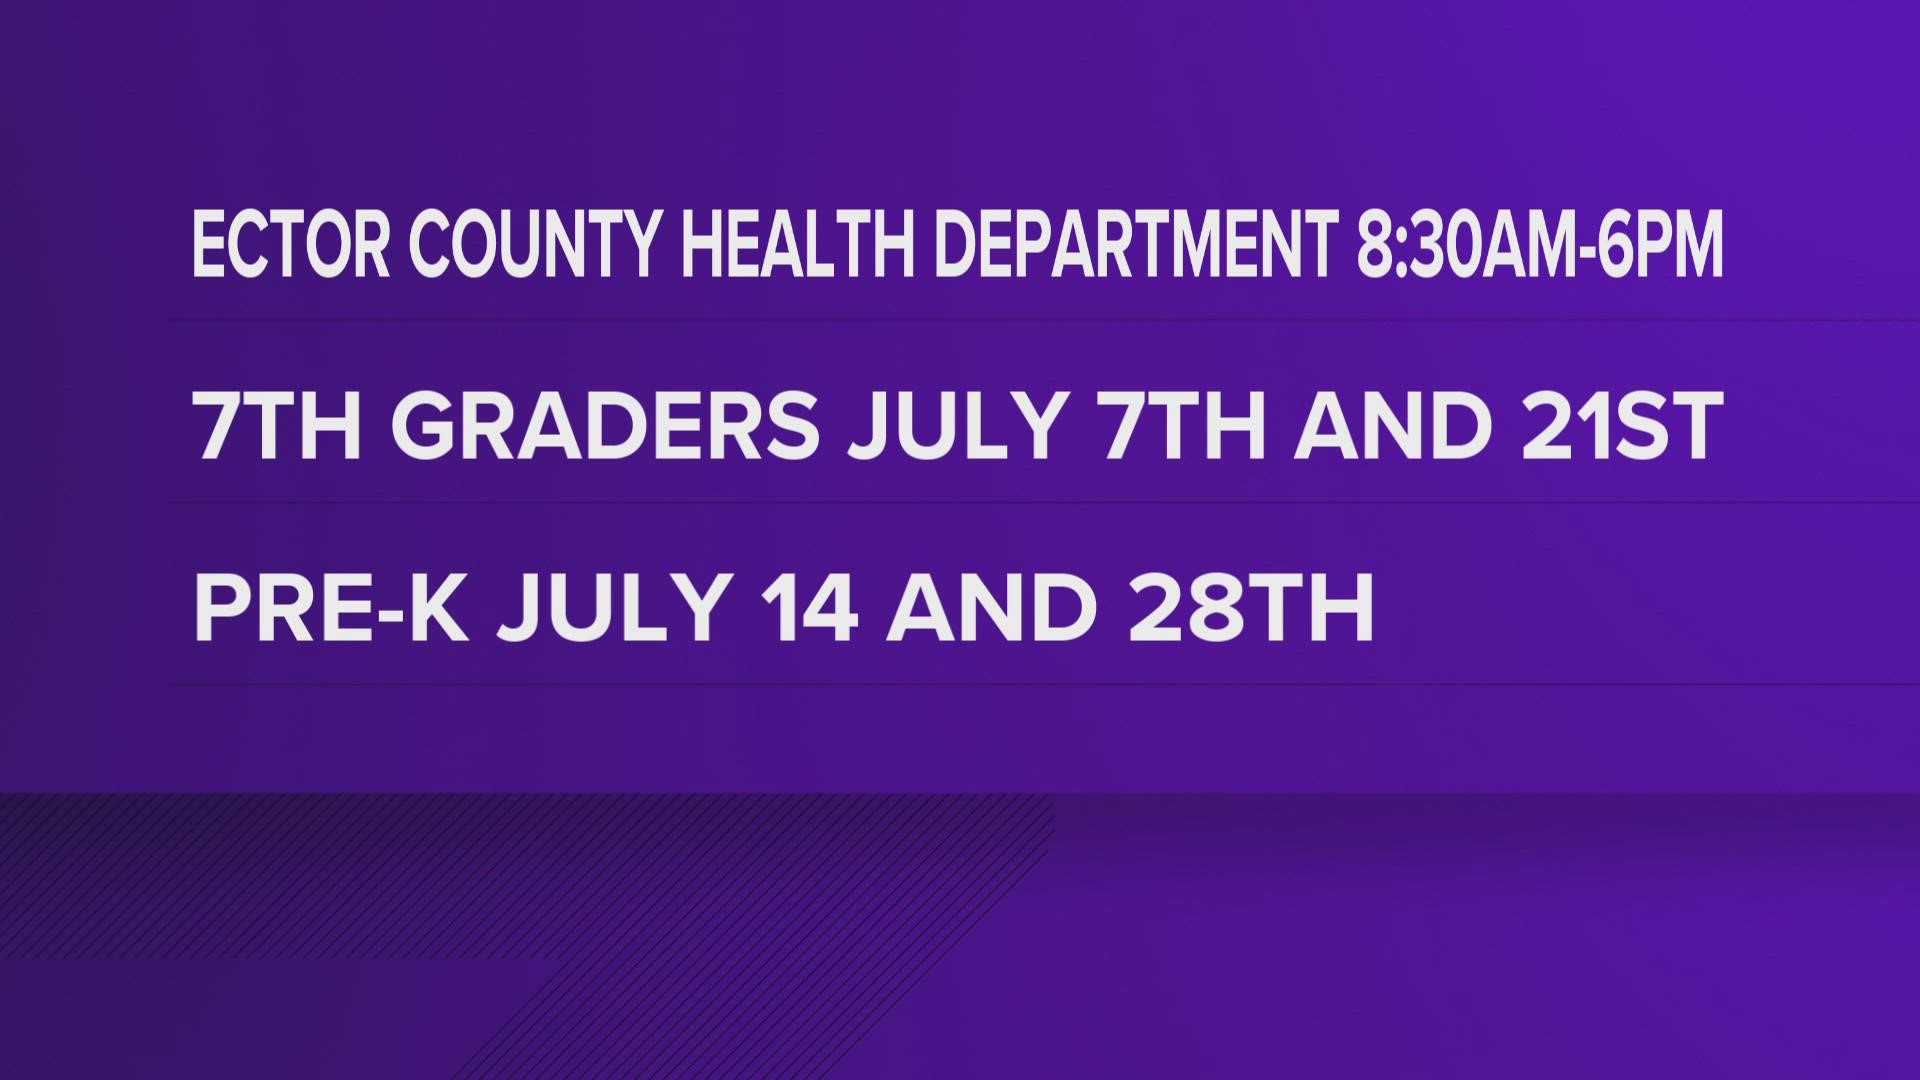 The clinics will be for Pre-K and 7th grade.